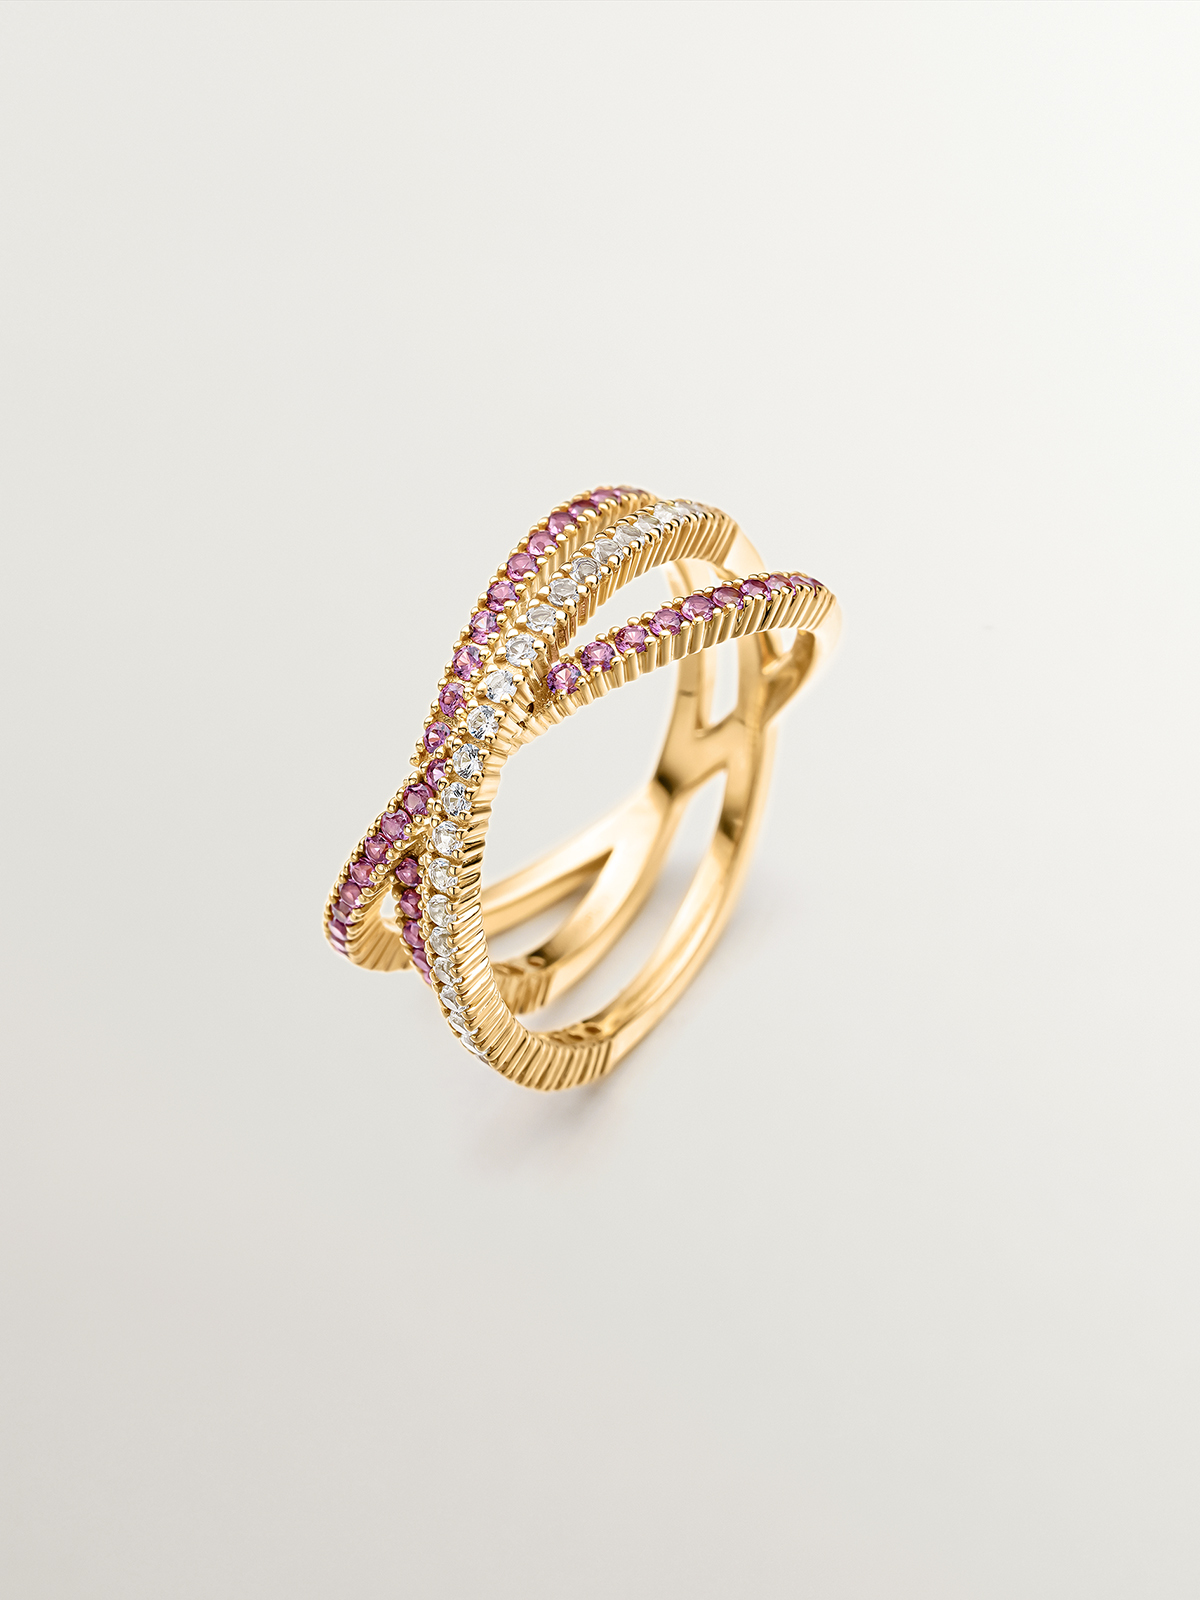 925 Silver triple crossover ring bathed in 18K yellow gold with white topaz and purple rhodolite.